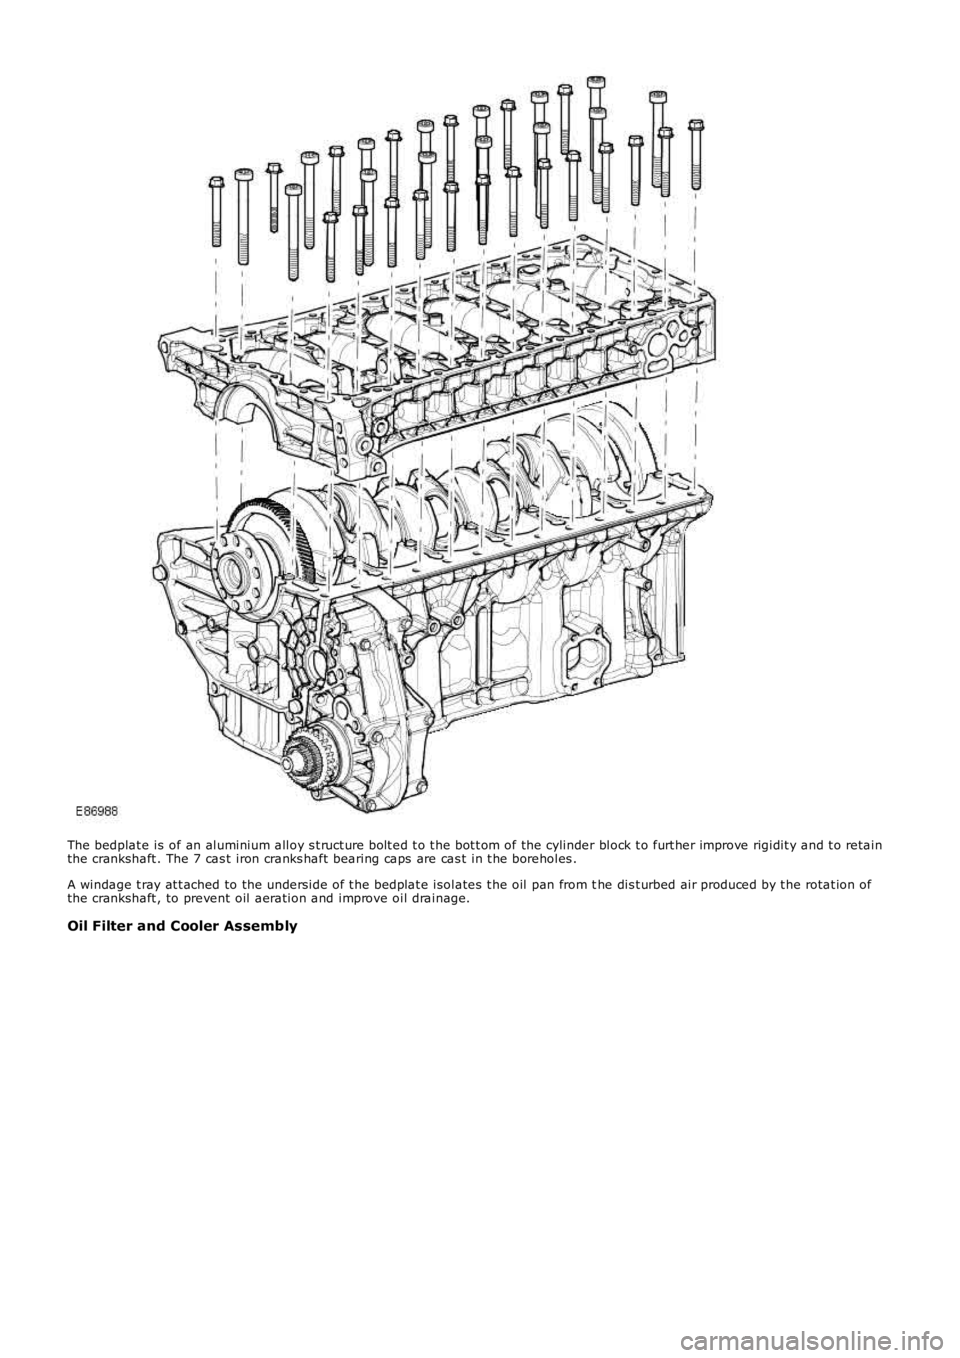 LAND ROVER FRELANDER 2 2006  Repair Manual The bedplat e is  of an aluminium alloy s t ruct ure bolt ed t o t he bot t om of the cylinder block t o furt her improve rigidit y and t o retainthe crankshaft . The 7 cas t iron cranks haft bearing 